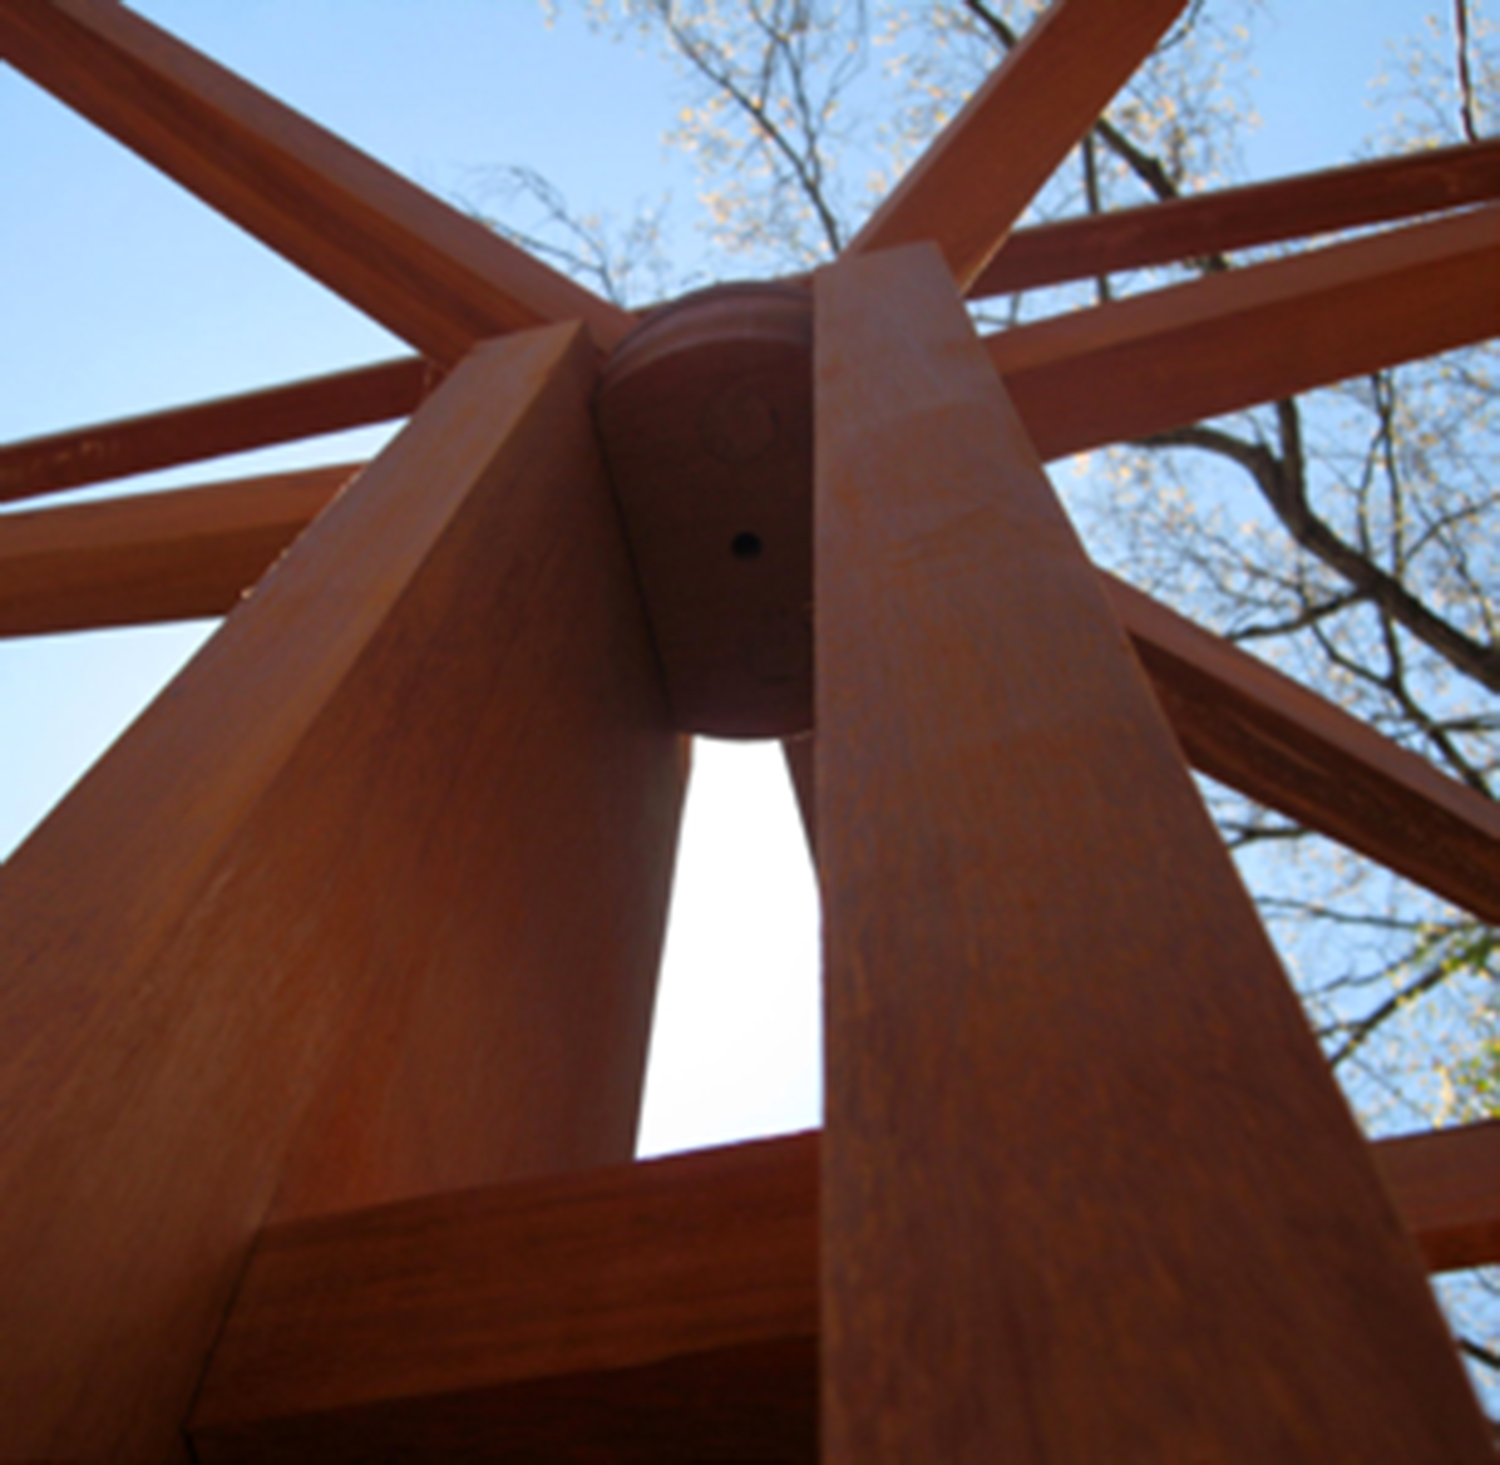 Bottom view of structural “trees” 